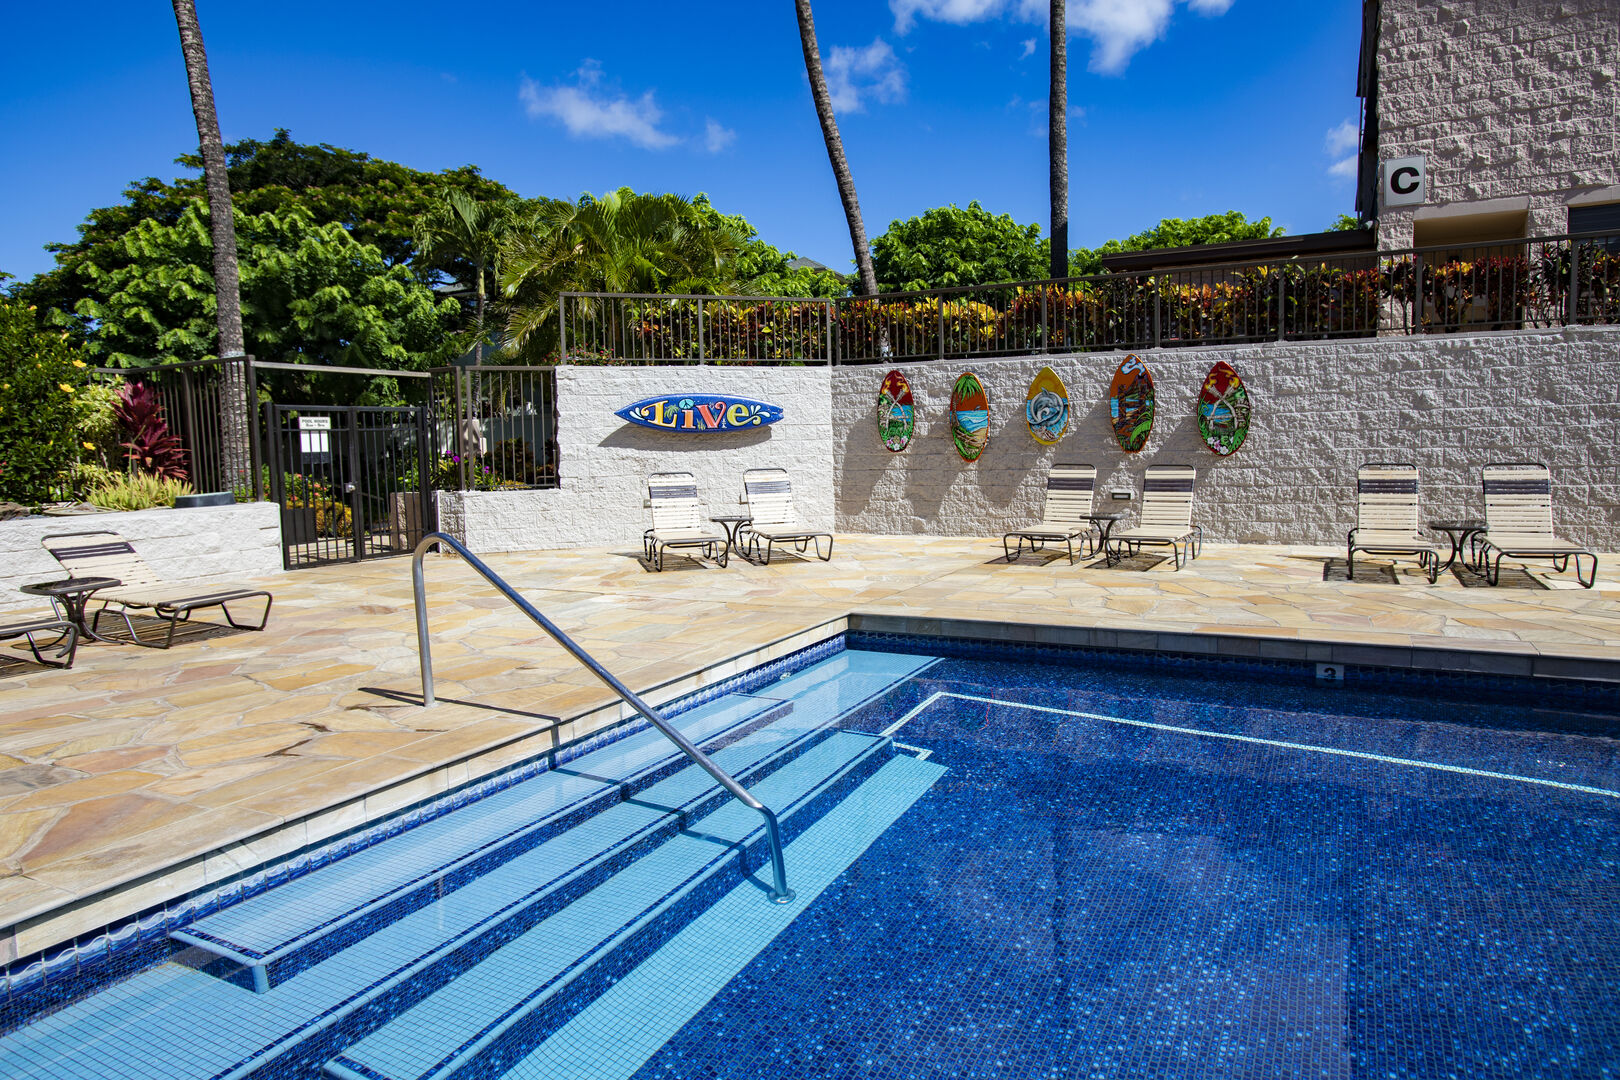 Have a dip in the swimming pool area!